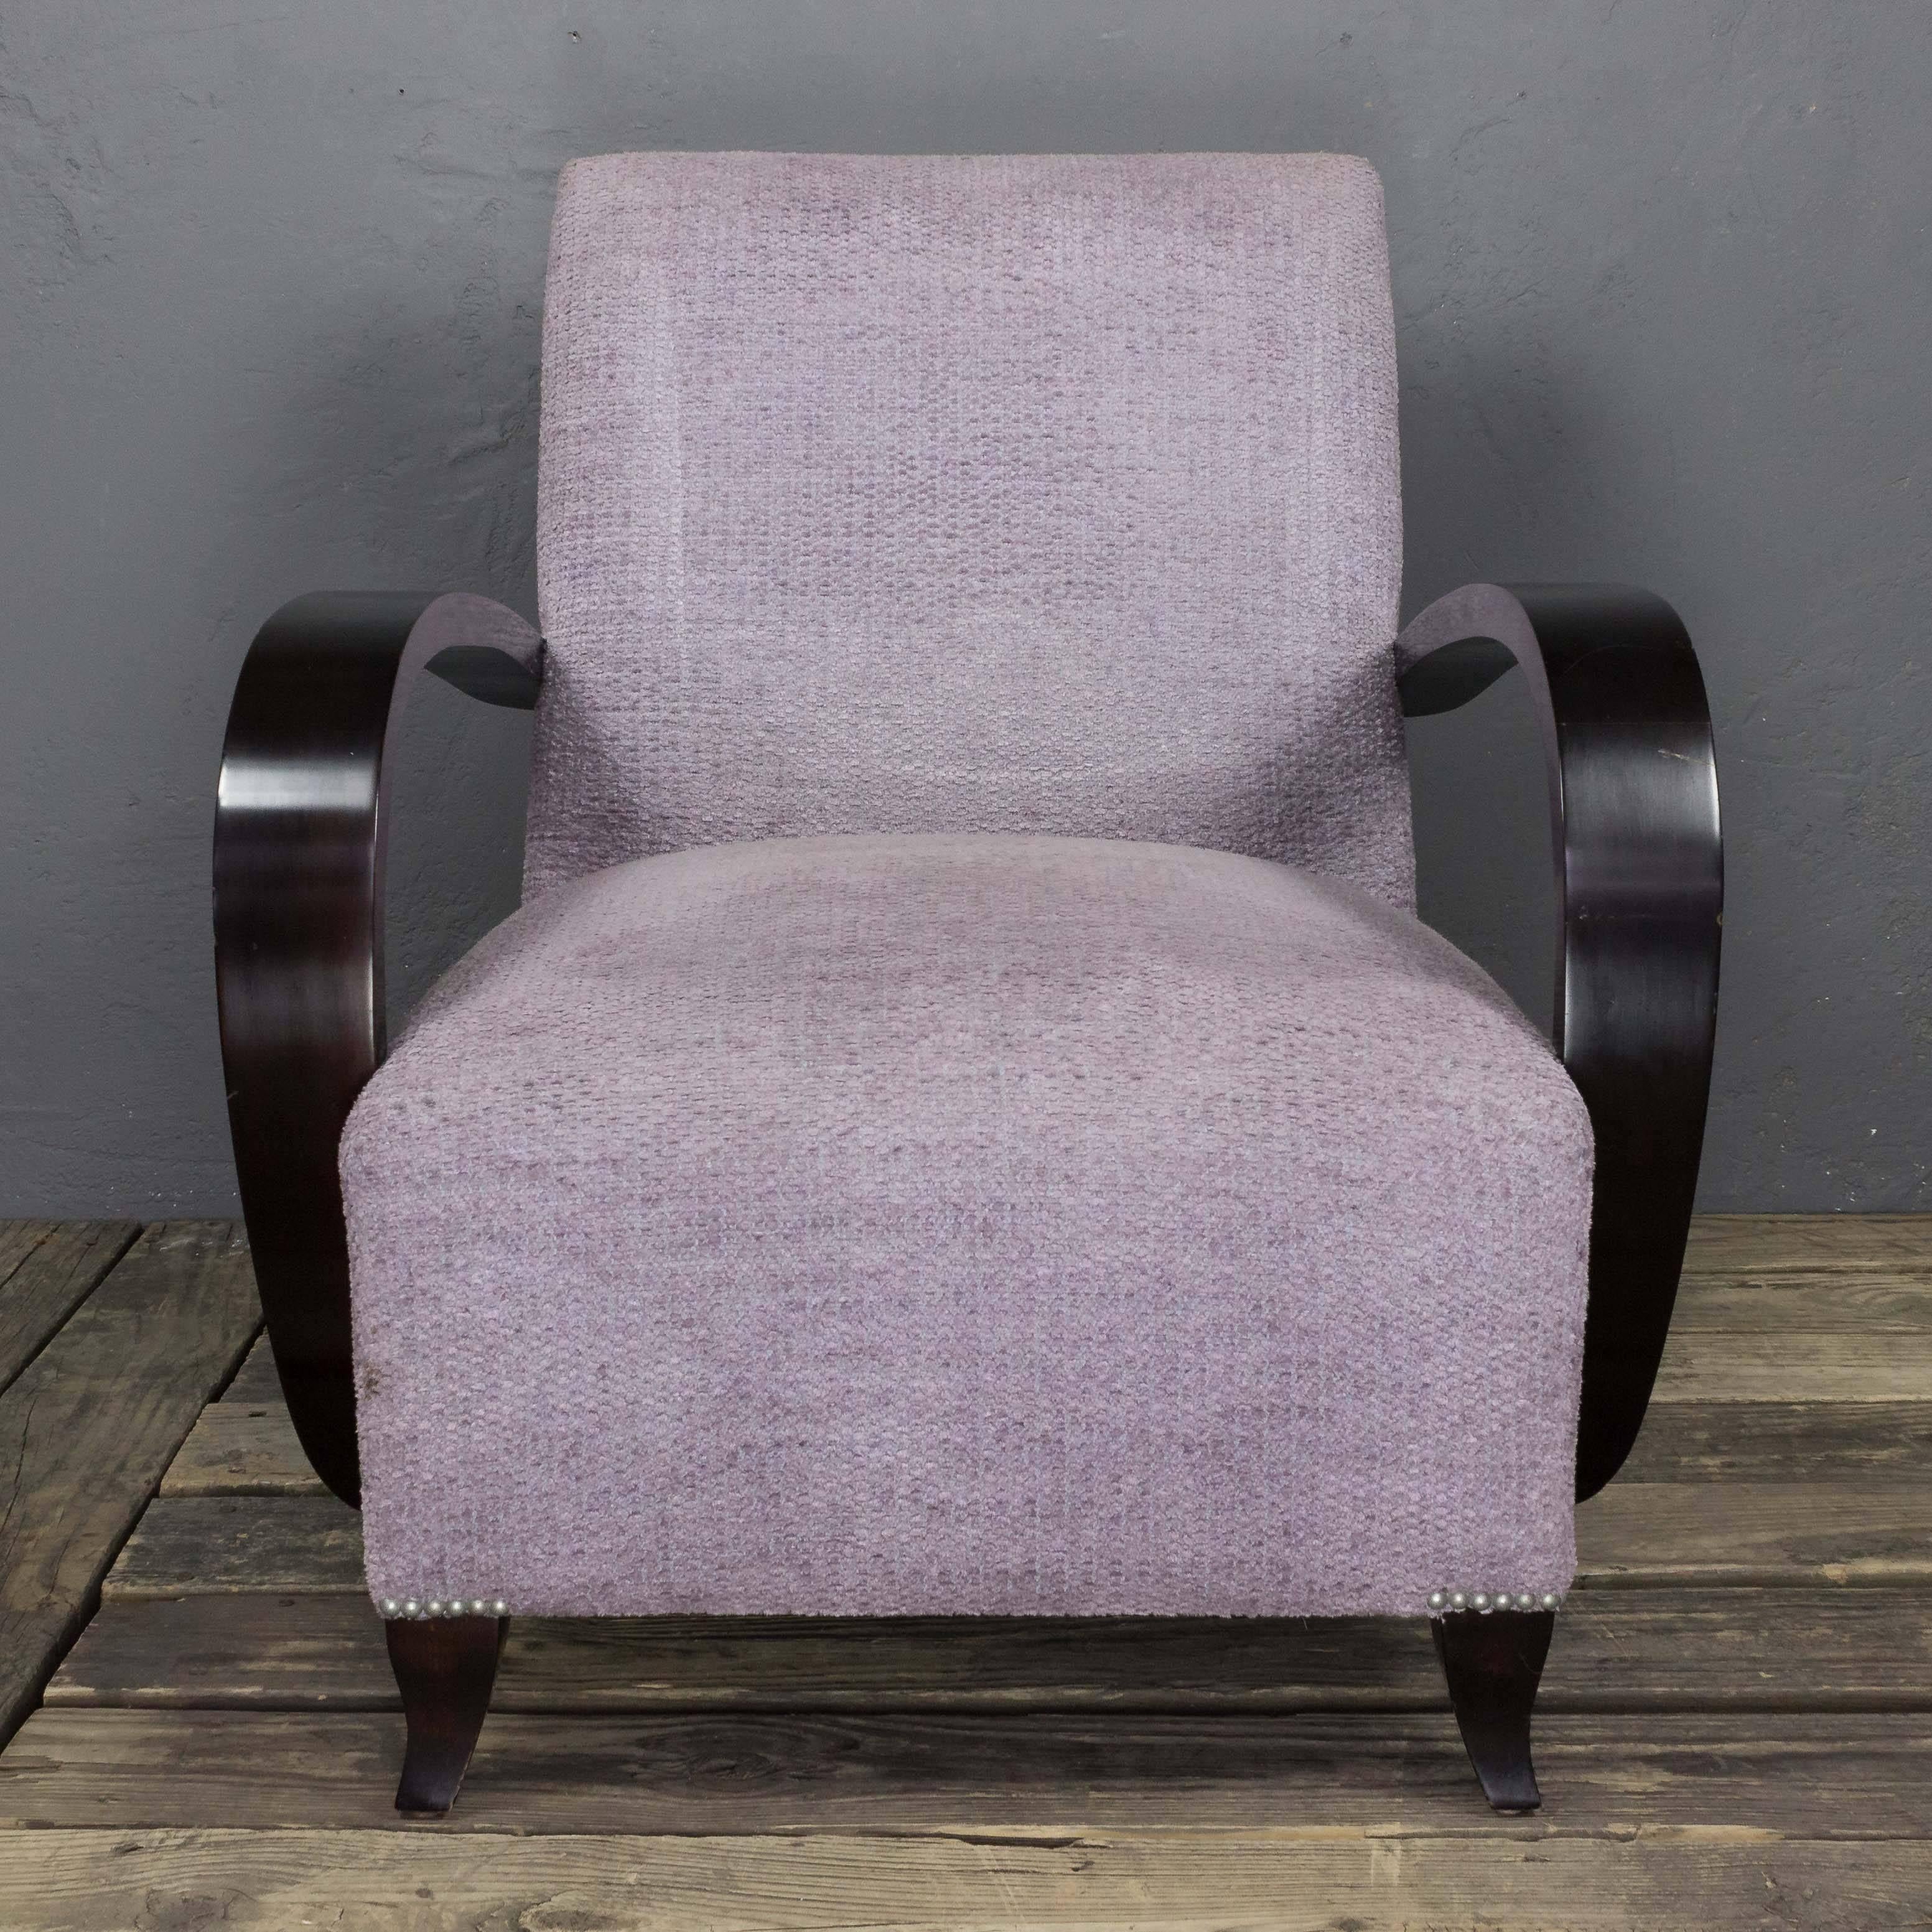 A newly manufactured Meg club chair. Add a classic touch to your home with this newly manufactured re-edition of a 1940s French club chair. Crafted with curved wooden arms and turned feet, it is available in your choice of dark brown or flat black